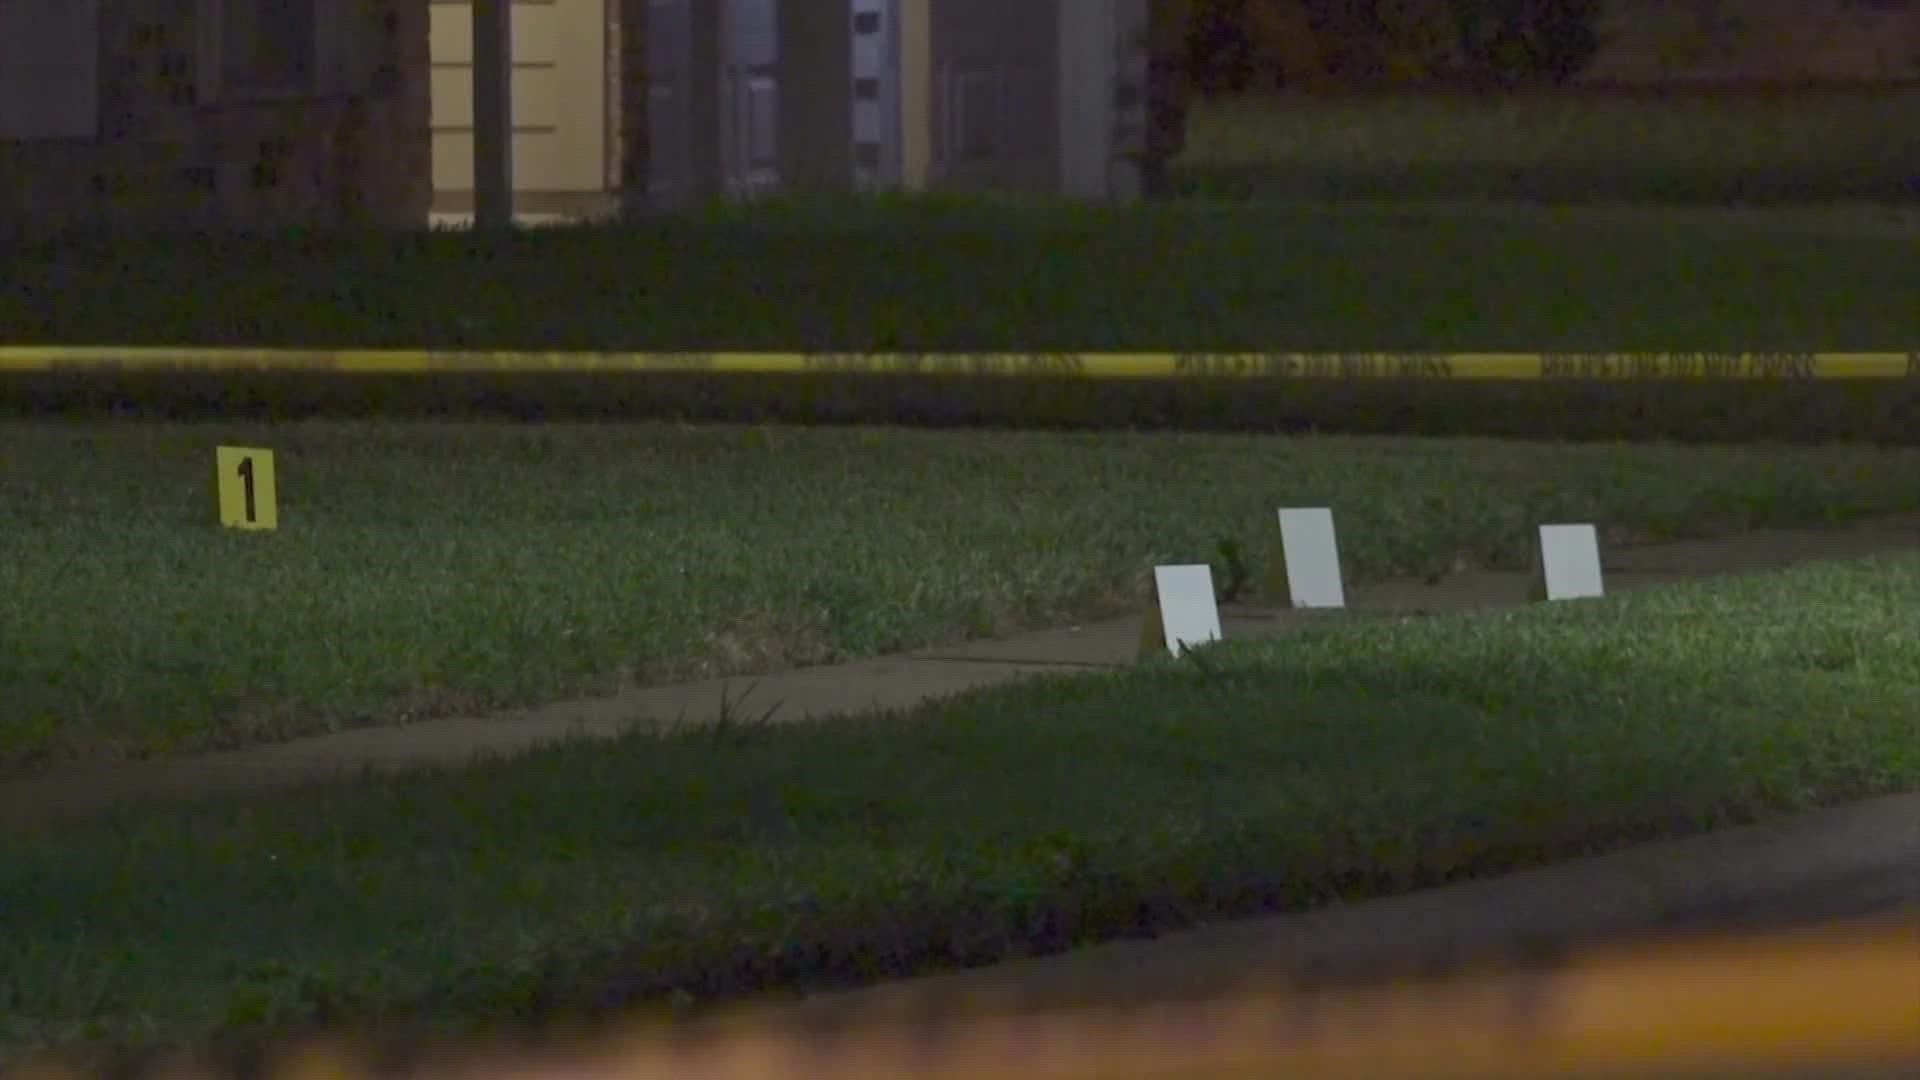 Harris County deputies said they believe the victims were targeted but they are not sure why.